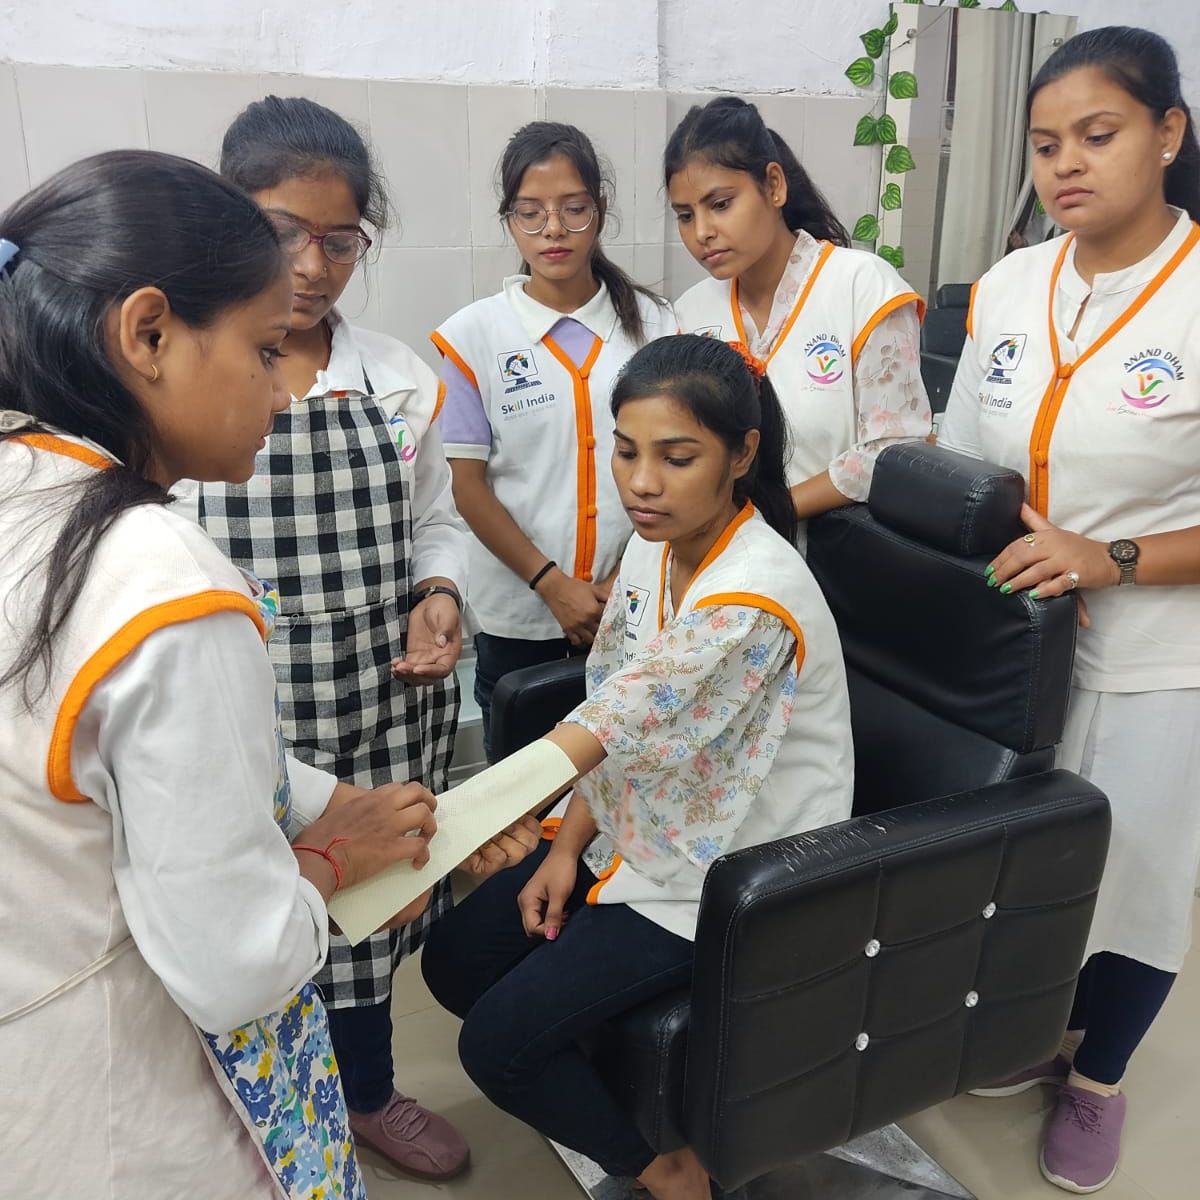 Practice makes us perfect!
The more you practice, the more perfect you become.

Beauty and Wellness trainees at VJM’s Anand Dham Kaushal Vikas Kendra, Faridabad, practicing their skills with teammates.

#Skilldevelopment #kaushalvikaskendra #training #trainingcourse #vjm #PMKVY